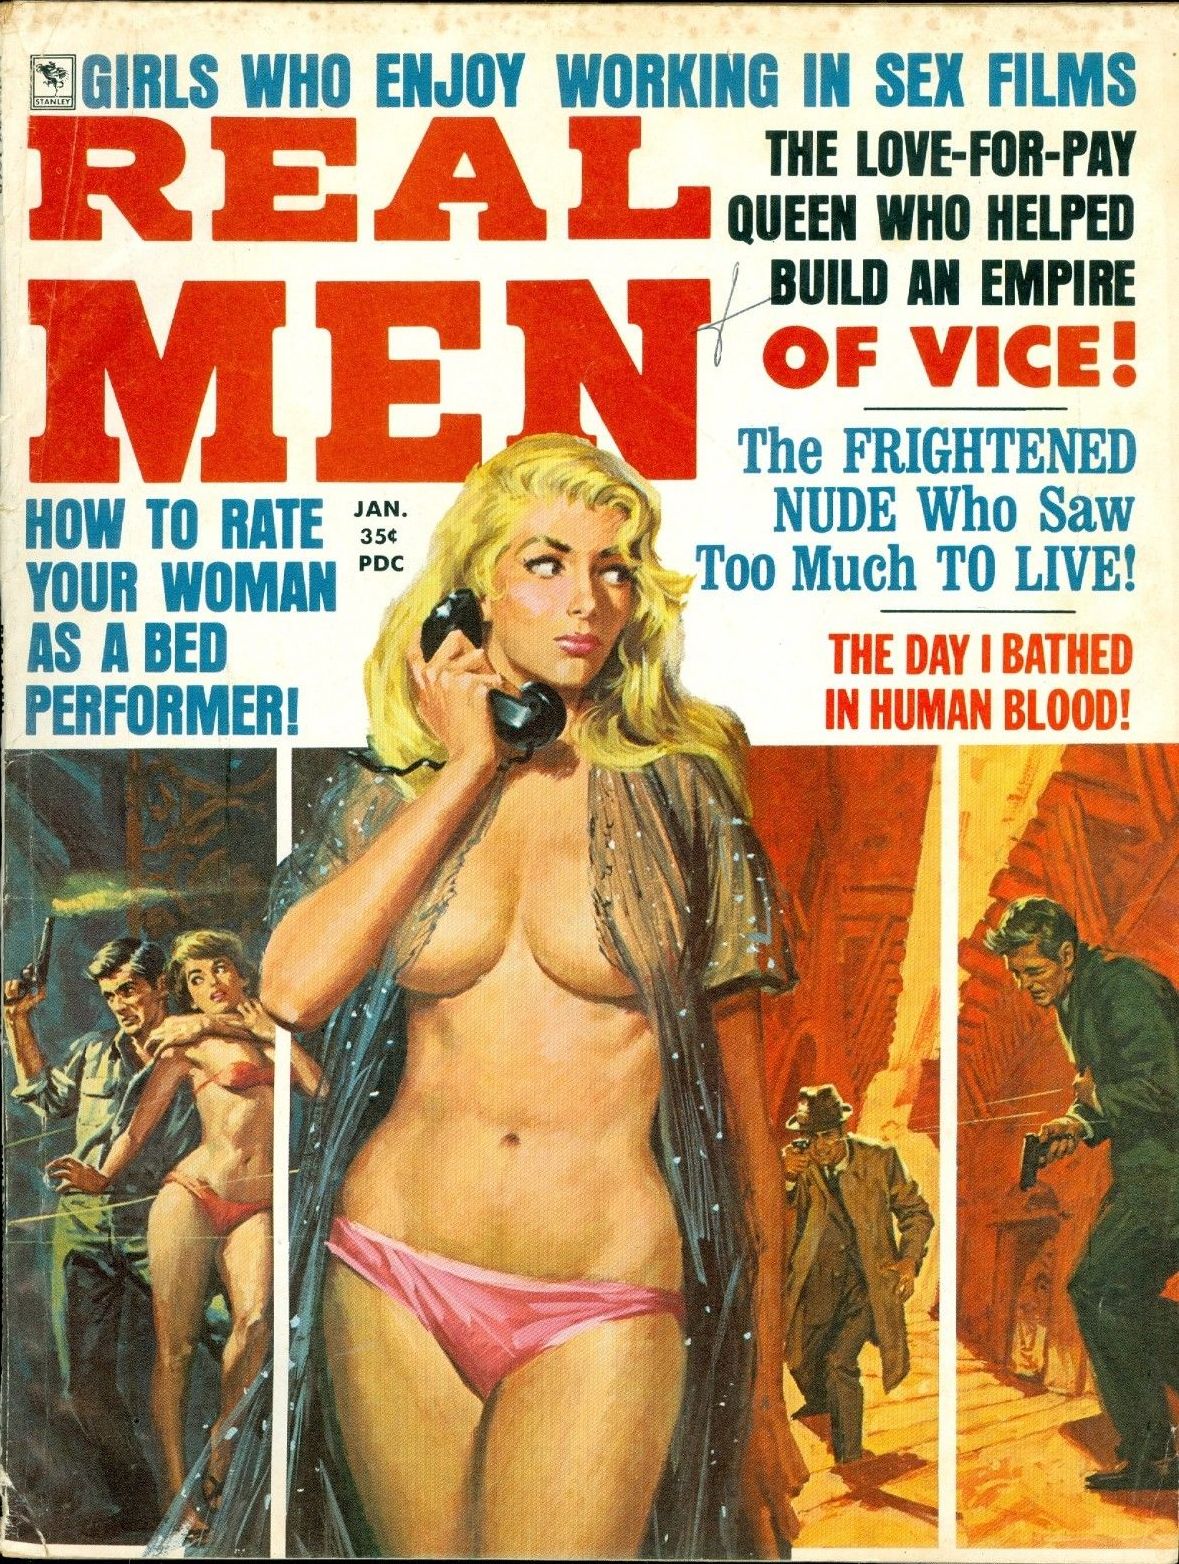 The Frightened Nude Who Saw Too Much To Live! -- Pulp Covers picture